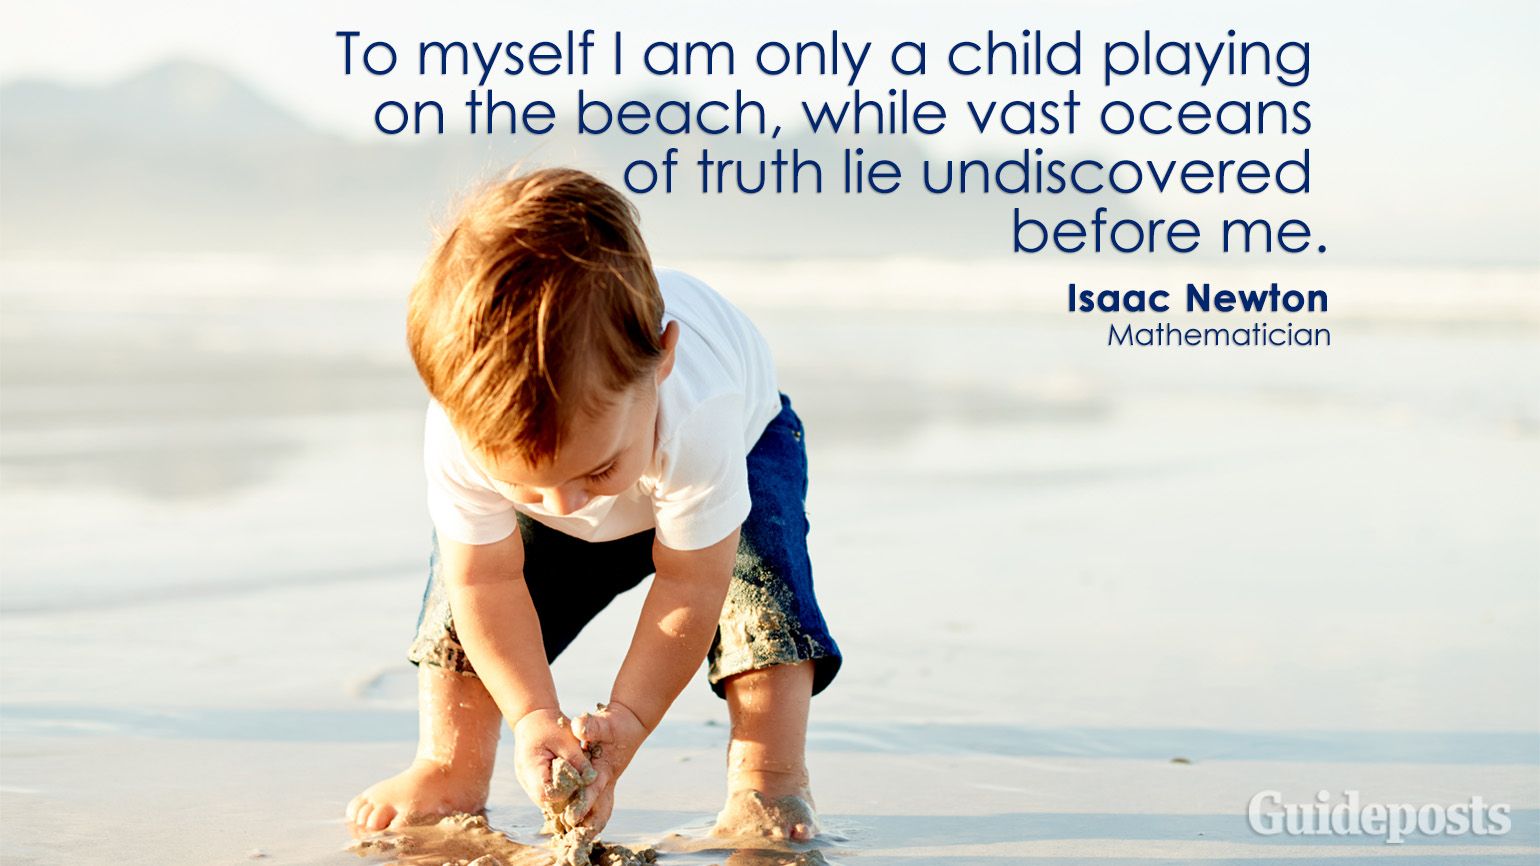 To myself I am only a child playing on the beach, while vast oceans of truth lie undiscovered before me. Isaac Newton